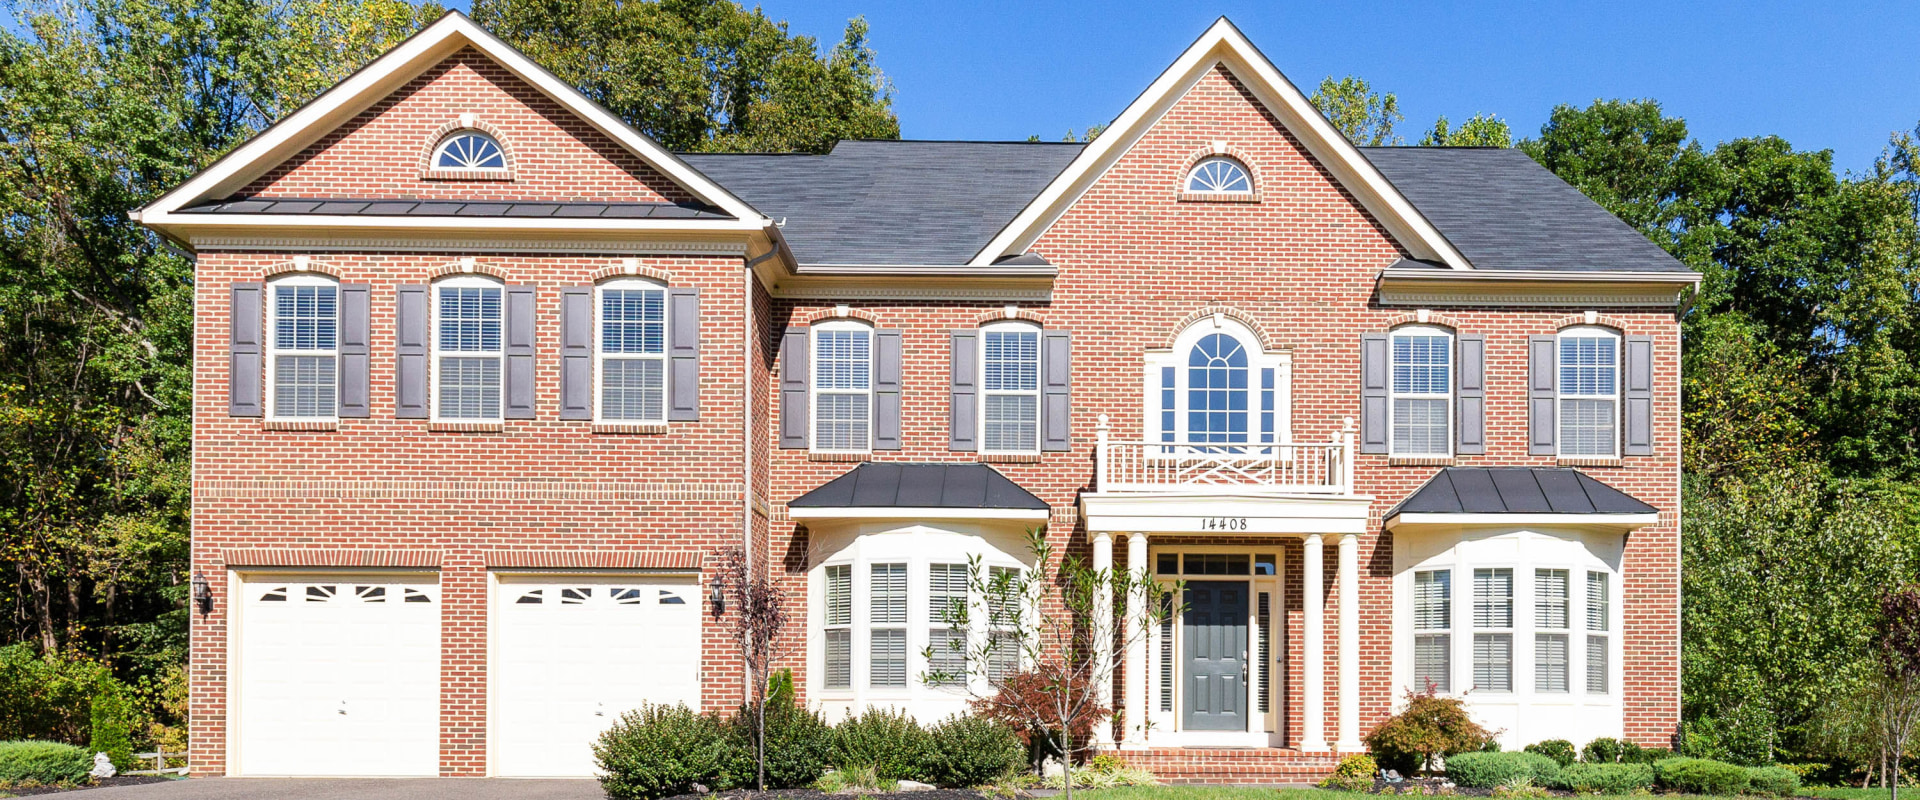 Buying a Home in Prince George's County: What You Need to Know